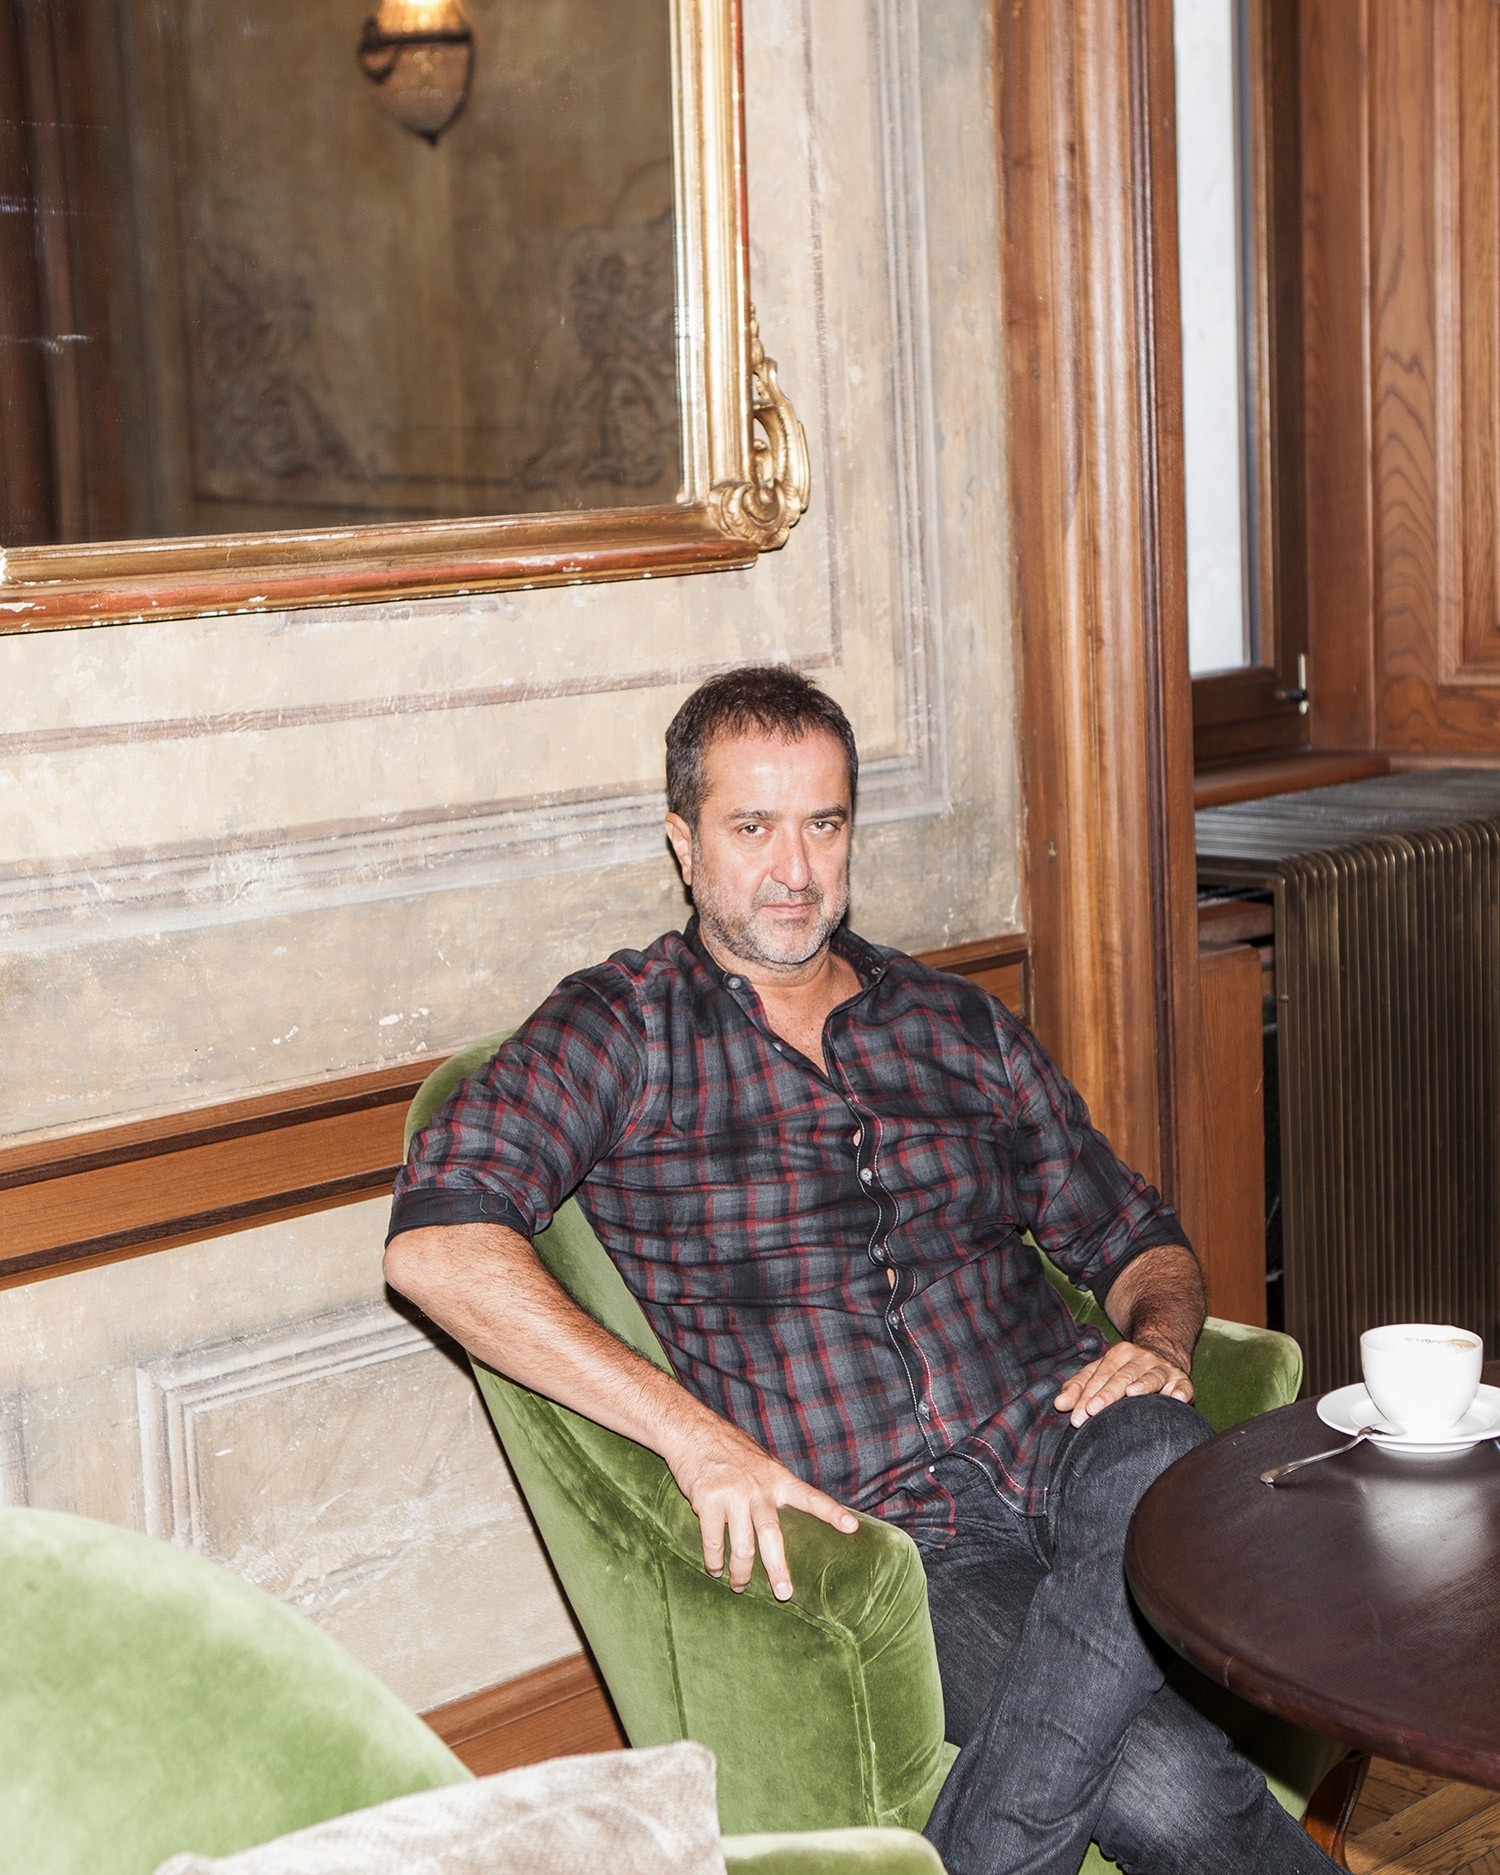 THE REAL STATE OF ISTANBUL: SERDAR BILGILI BELIEVES IN THE TRANSFORMATIVE POWER OF ART (AND BUSINESS)